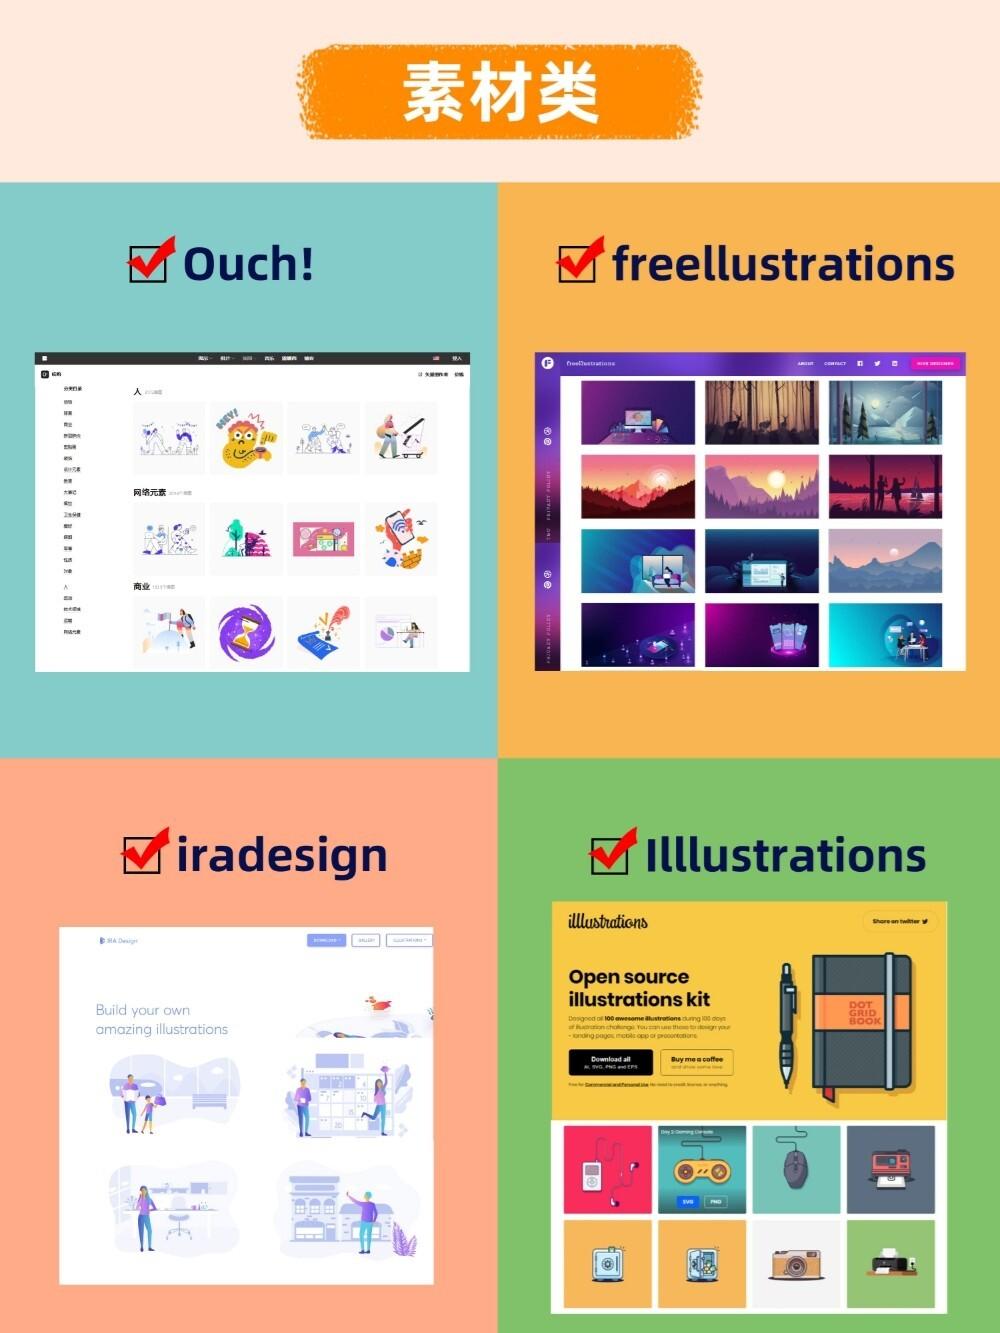 Collection of high-quality illustration material library丨A must-have website for self-study illustration